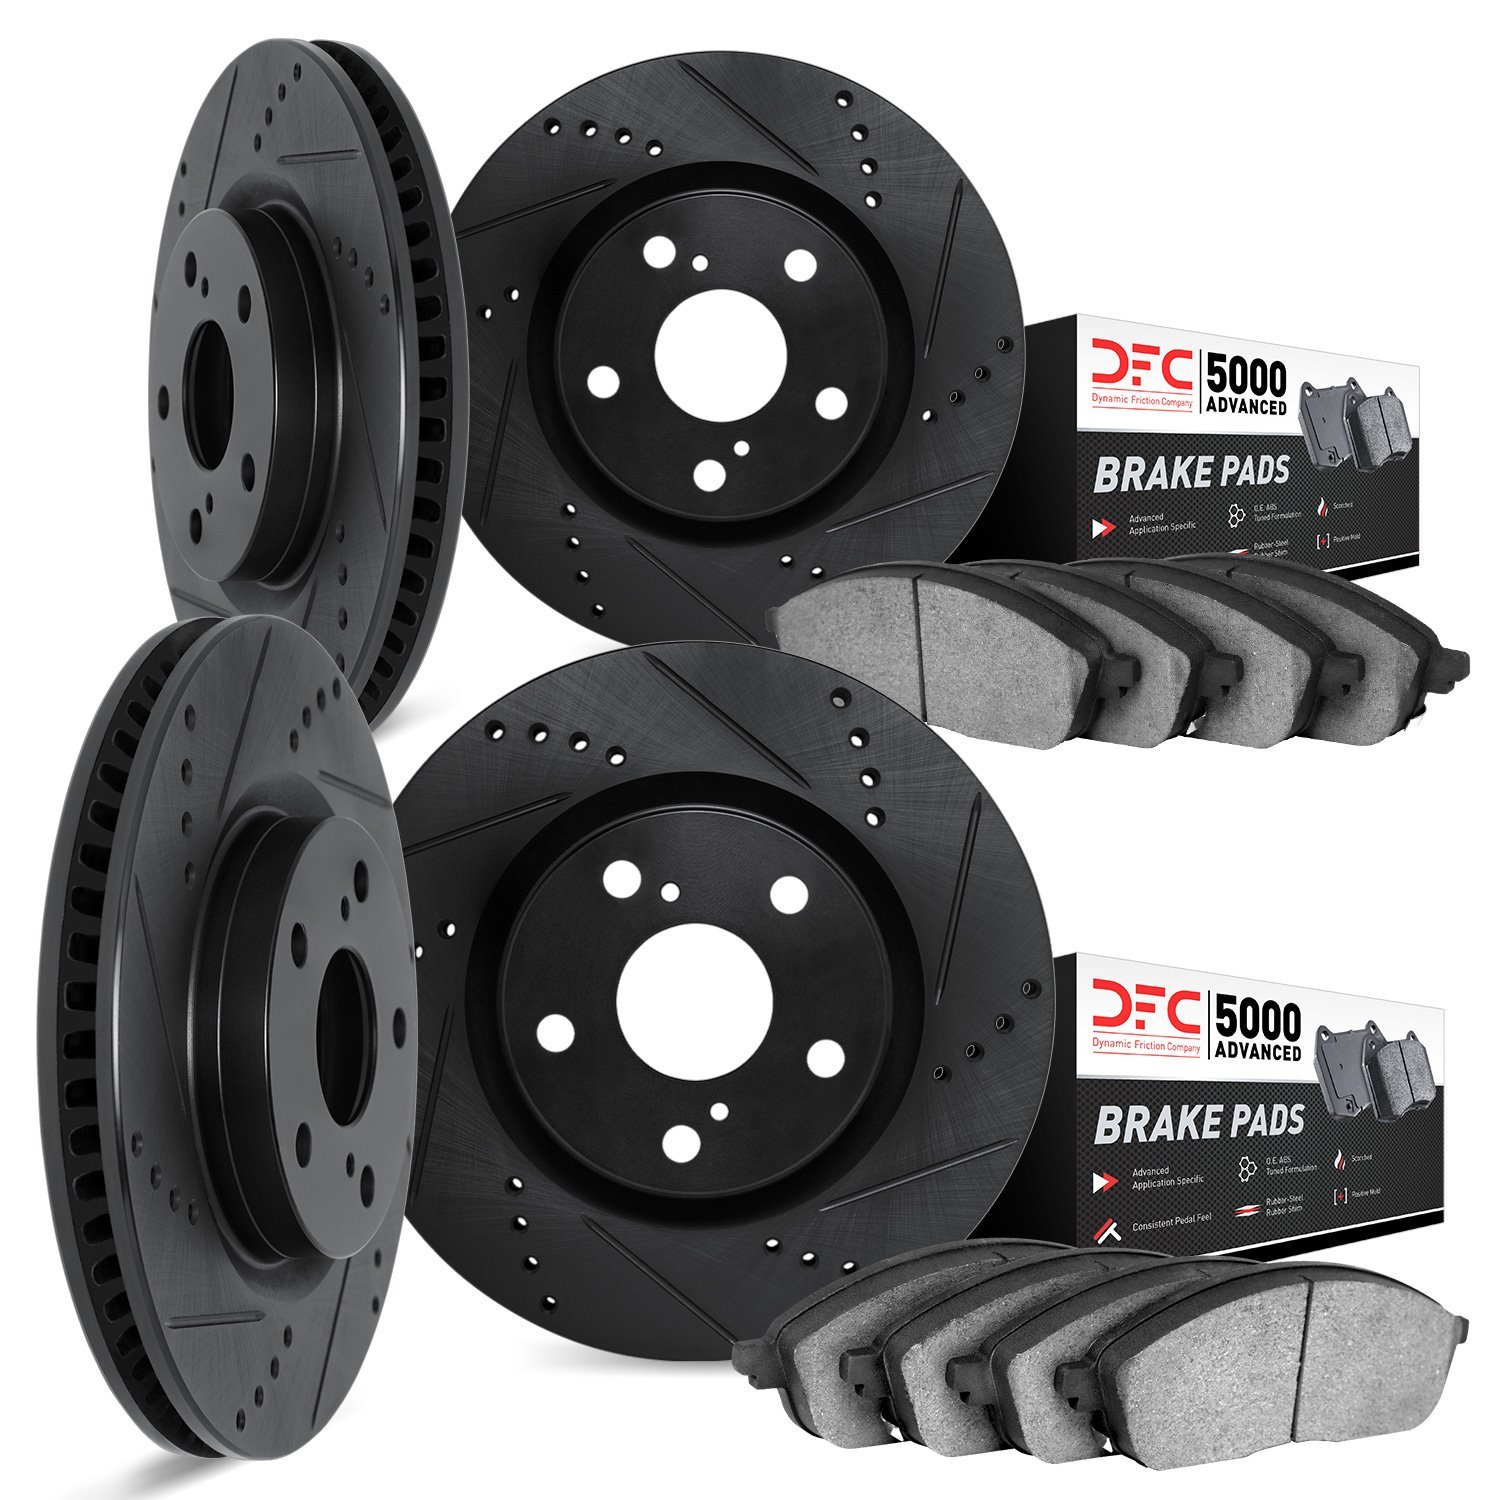 8504-31086 Drilled/Slotted Brake Rotors w/5000 Advanced Brake Pads Kit [Black], Fits Select BMW, Position: Front and Rear